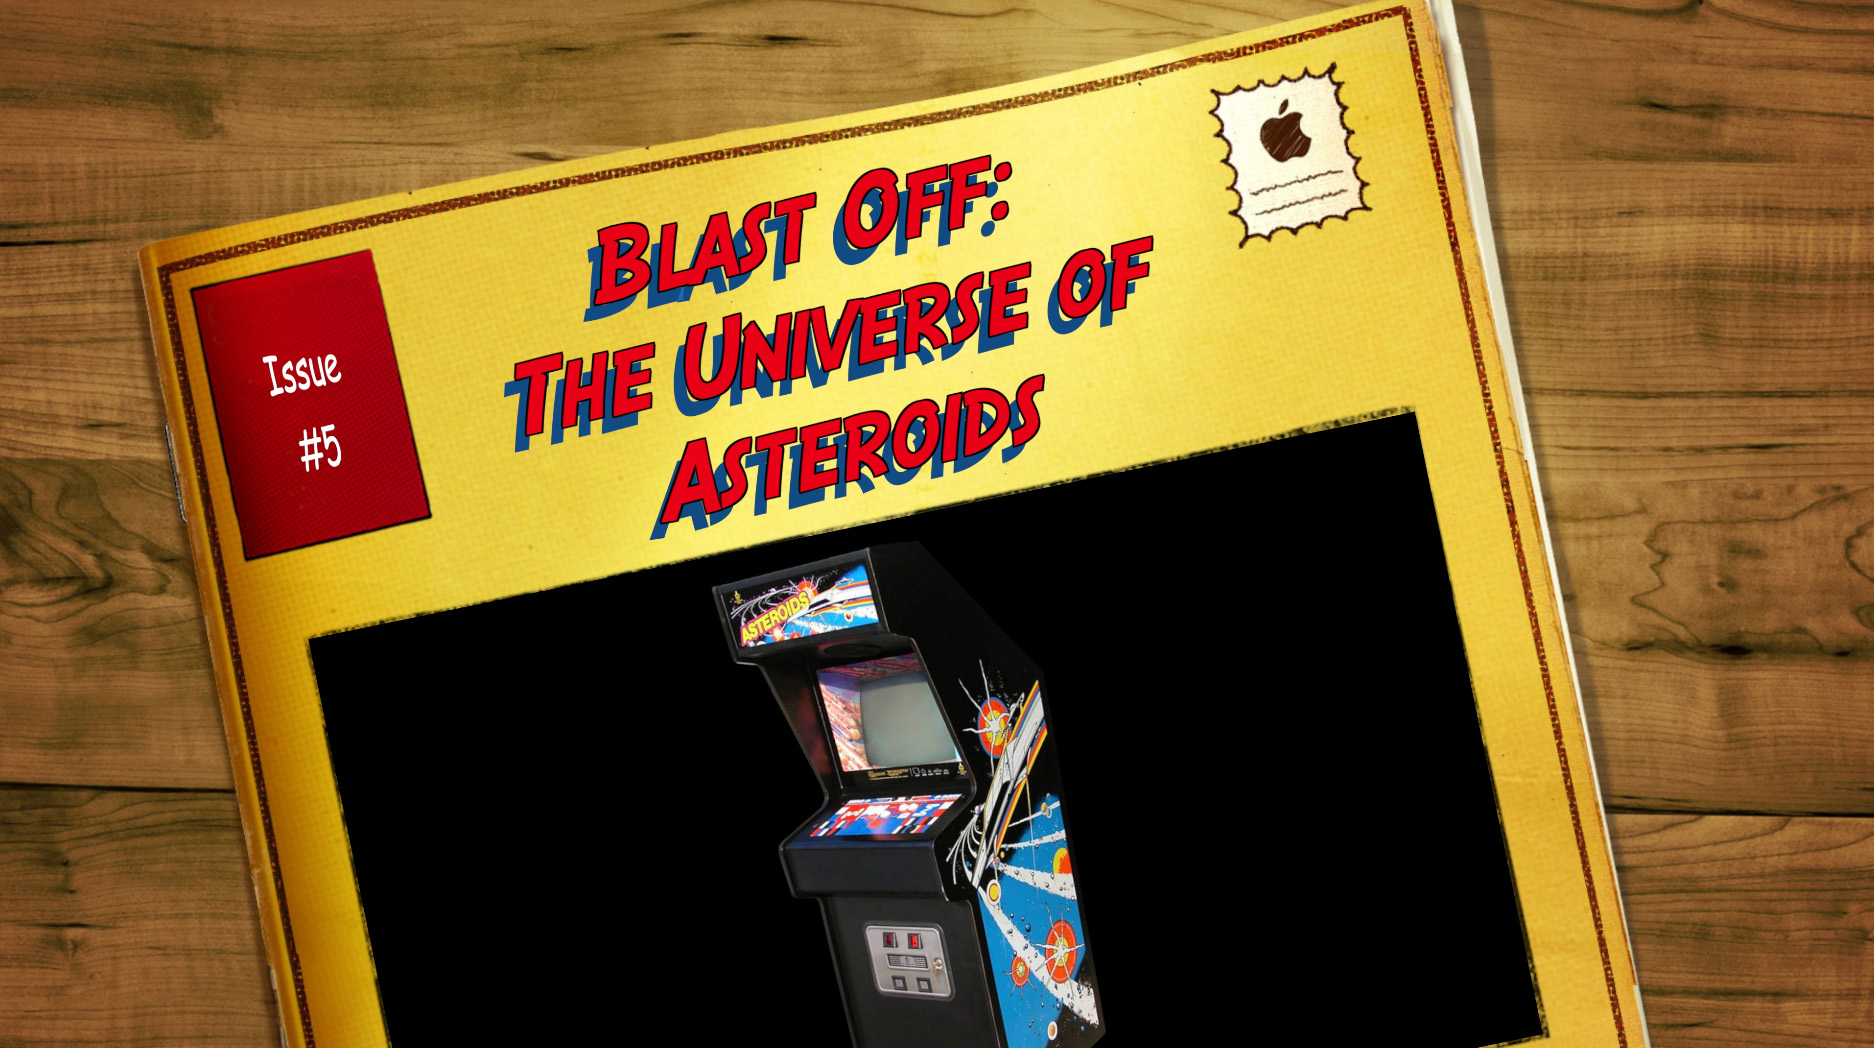 Issue #5 Blast Off: The Universe of Asteroids